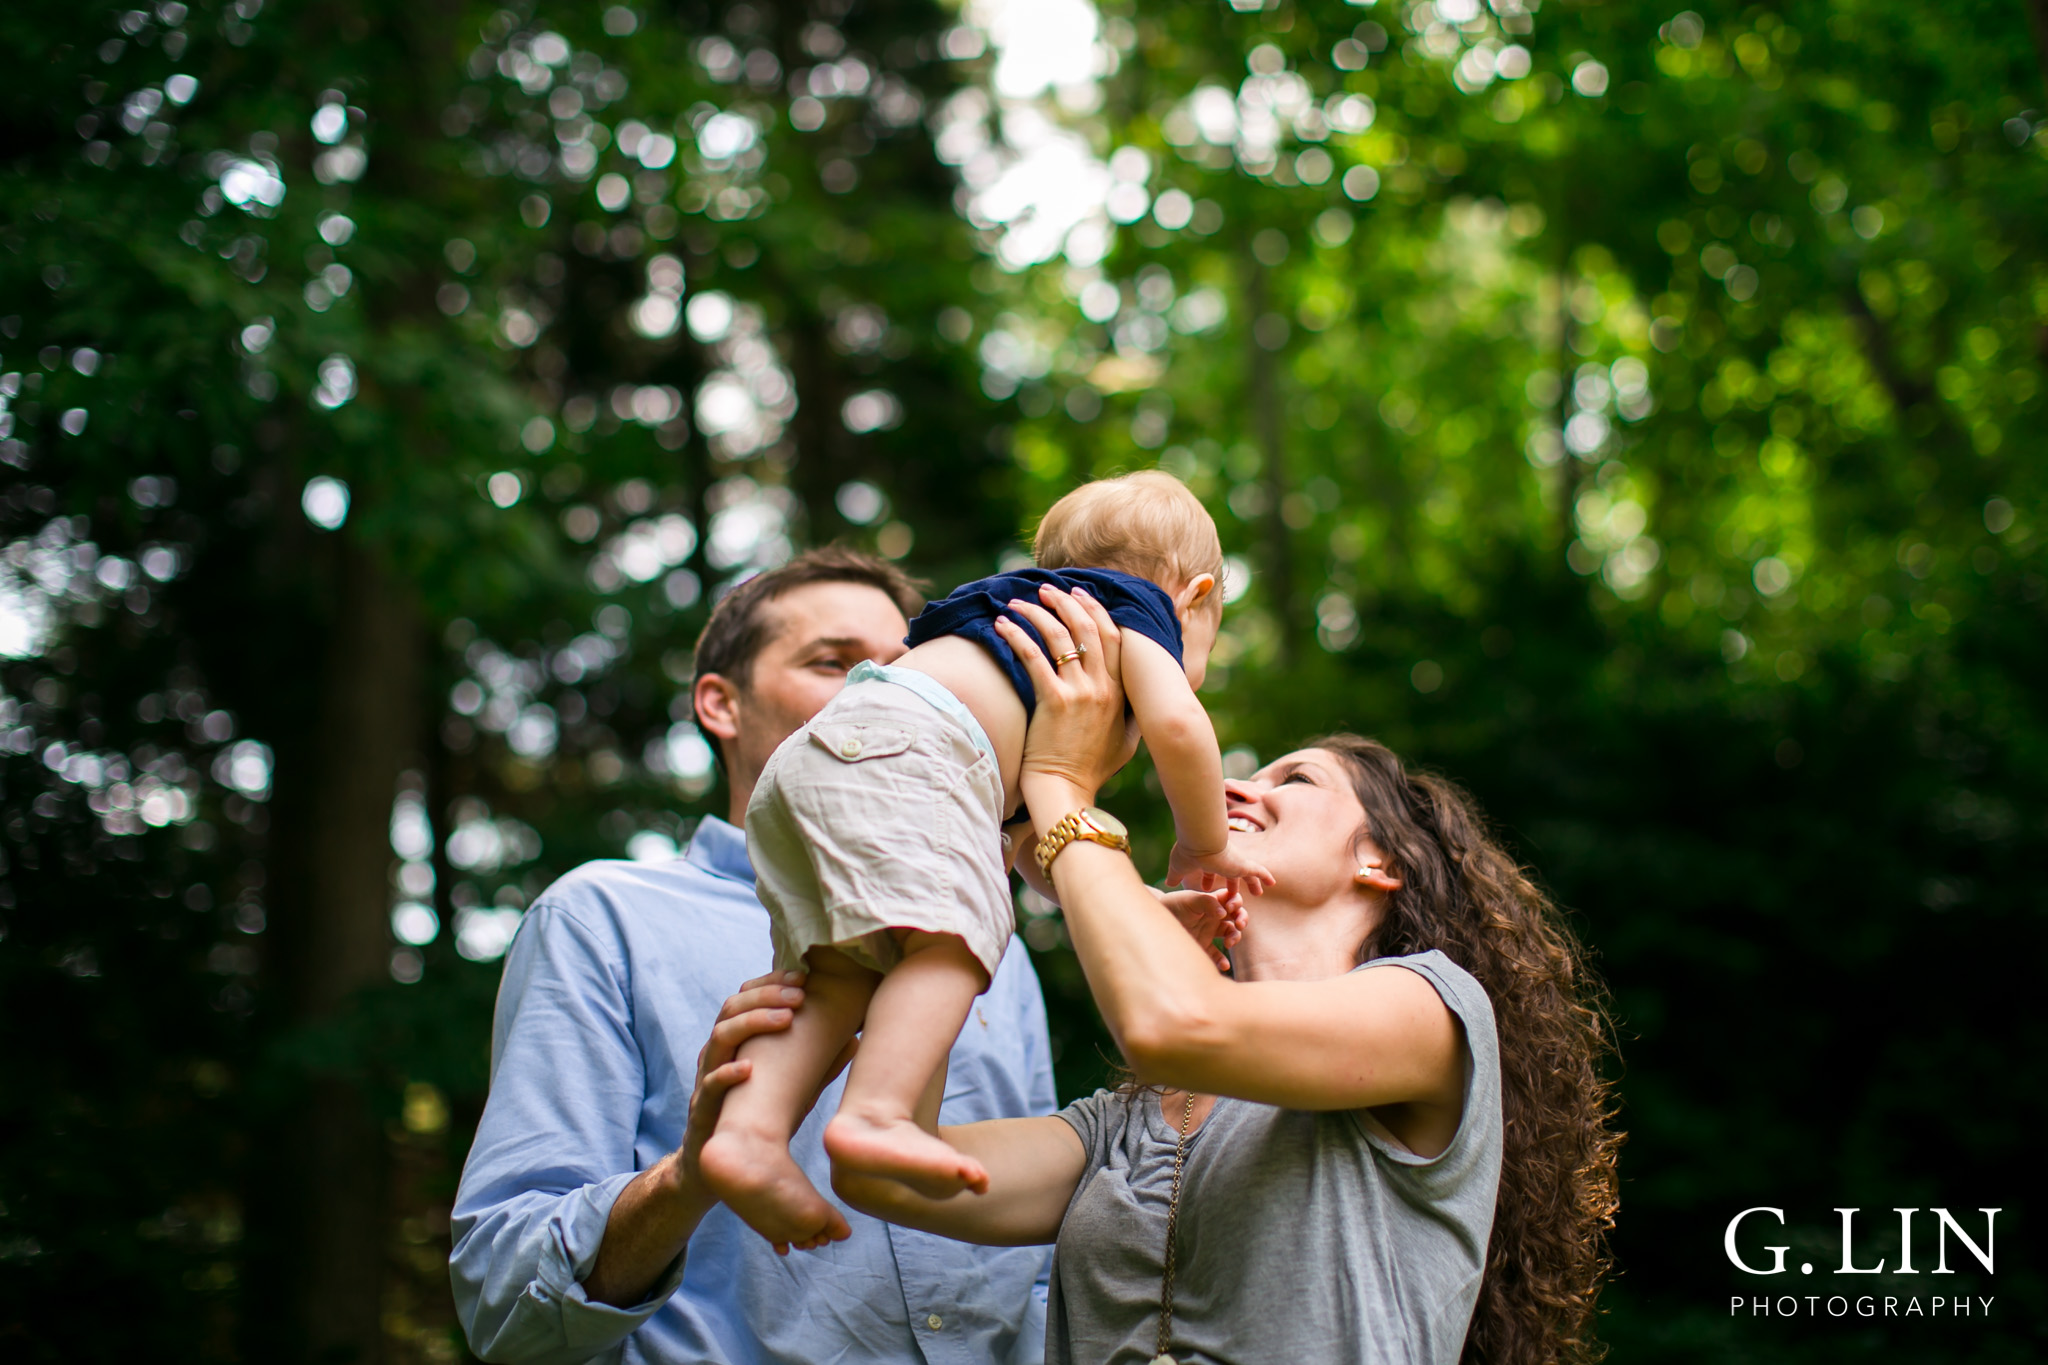 Raleigh Family Photography | G. Lin Photography | Mom and dad throwing baby in the air